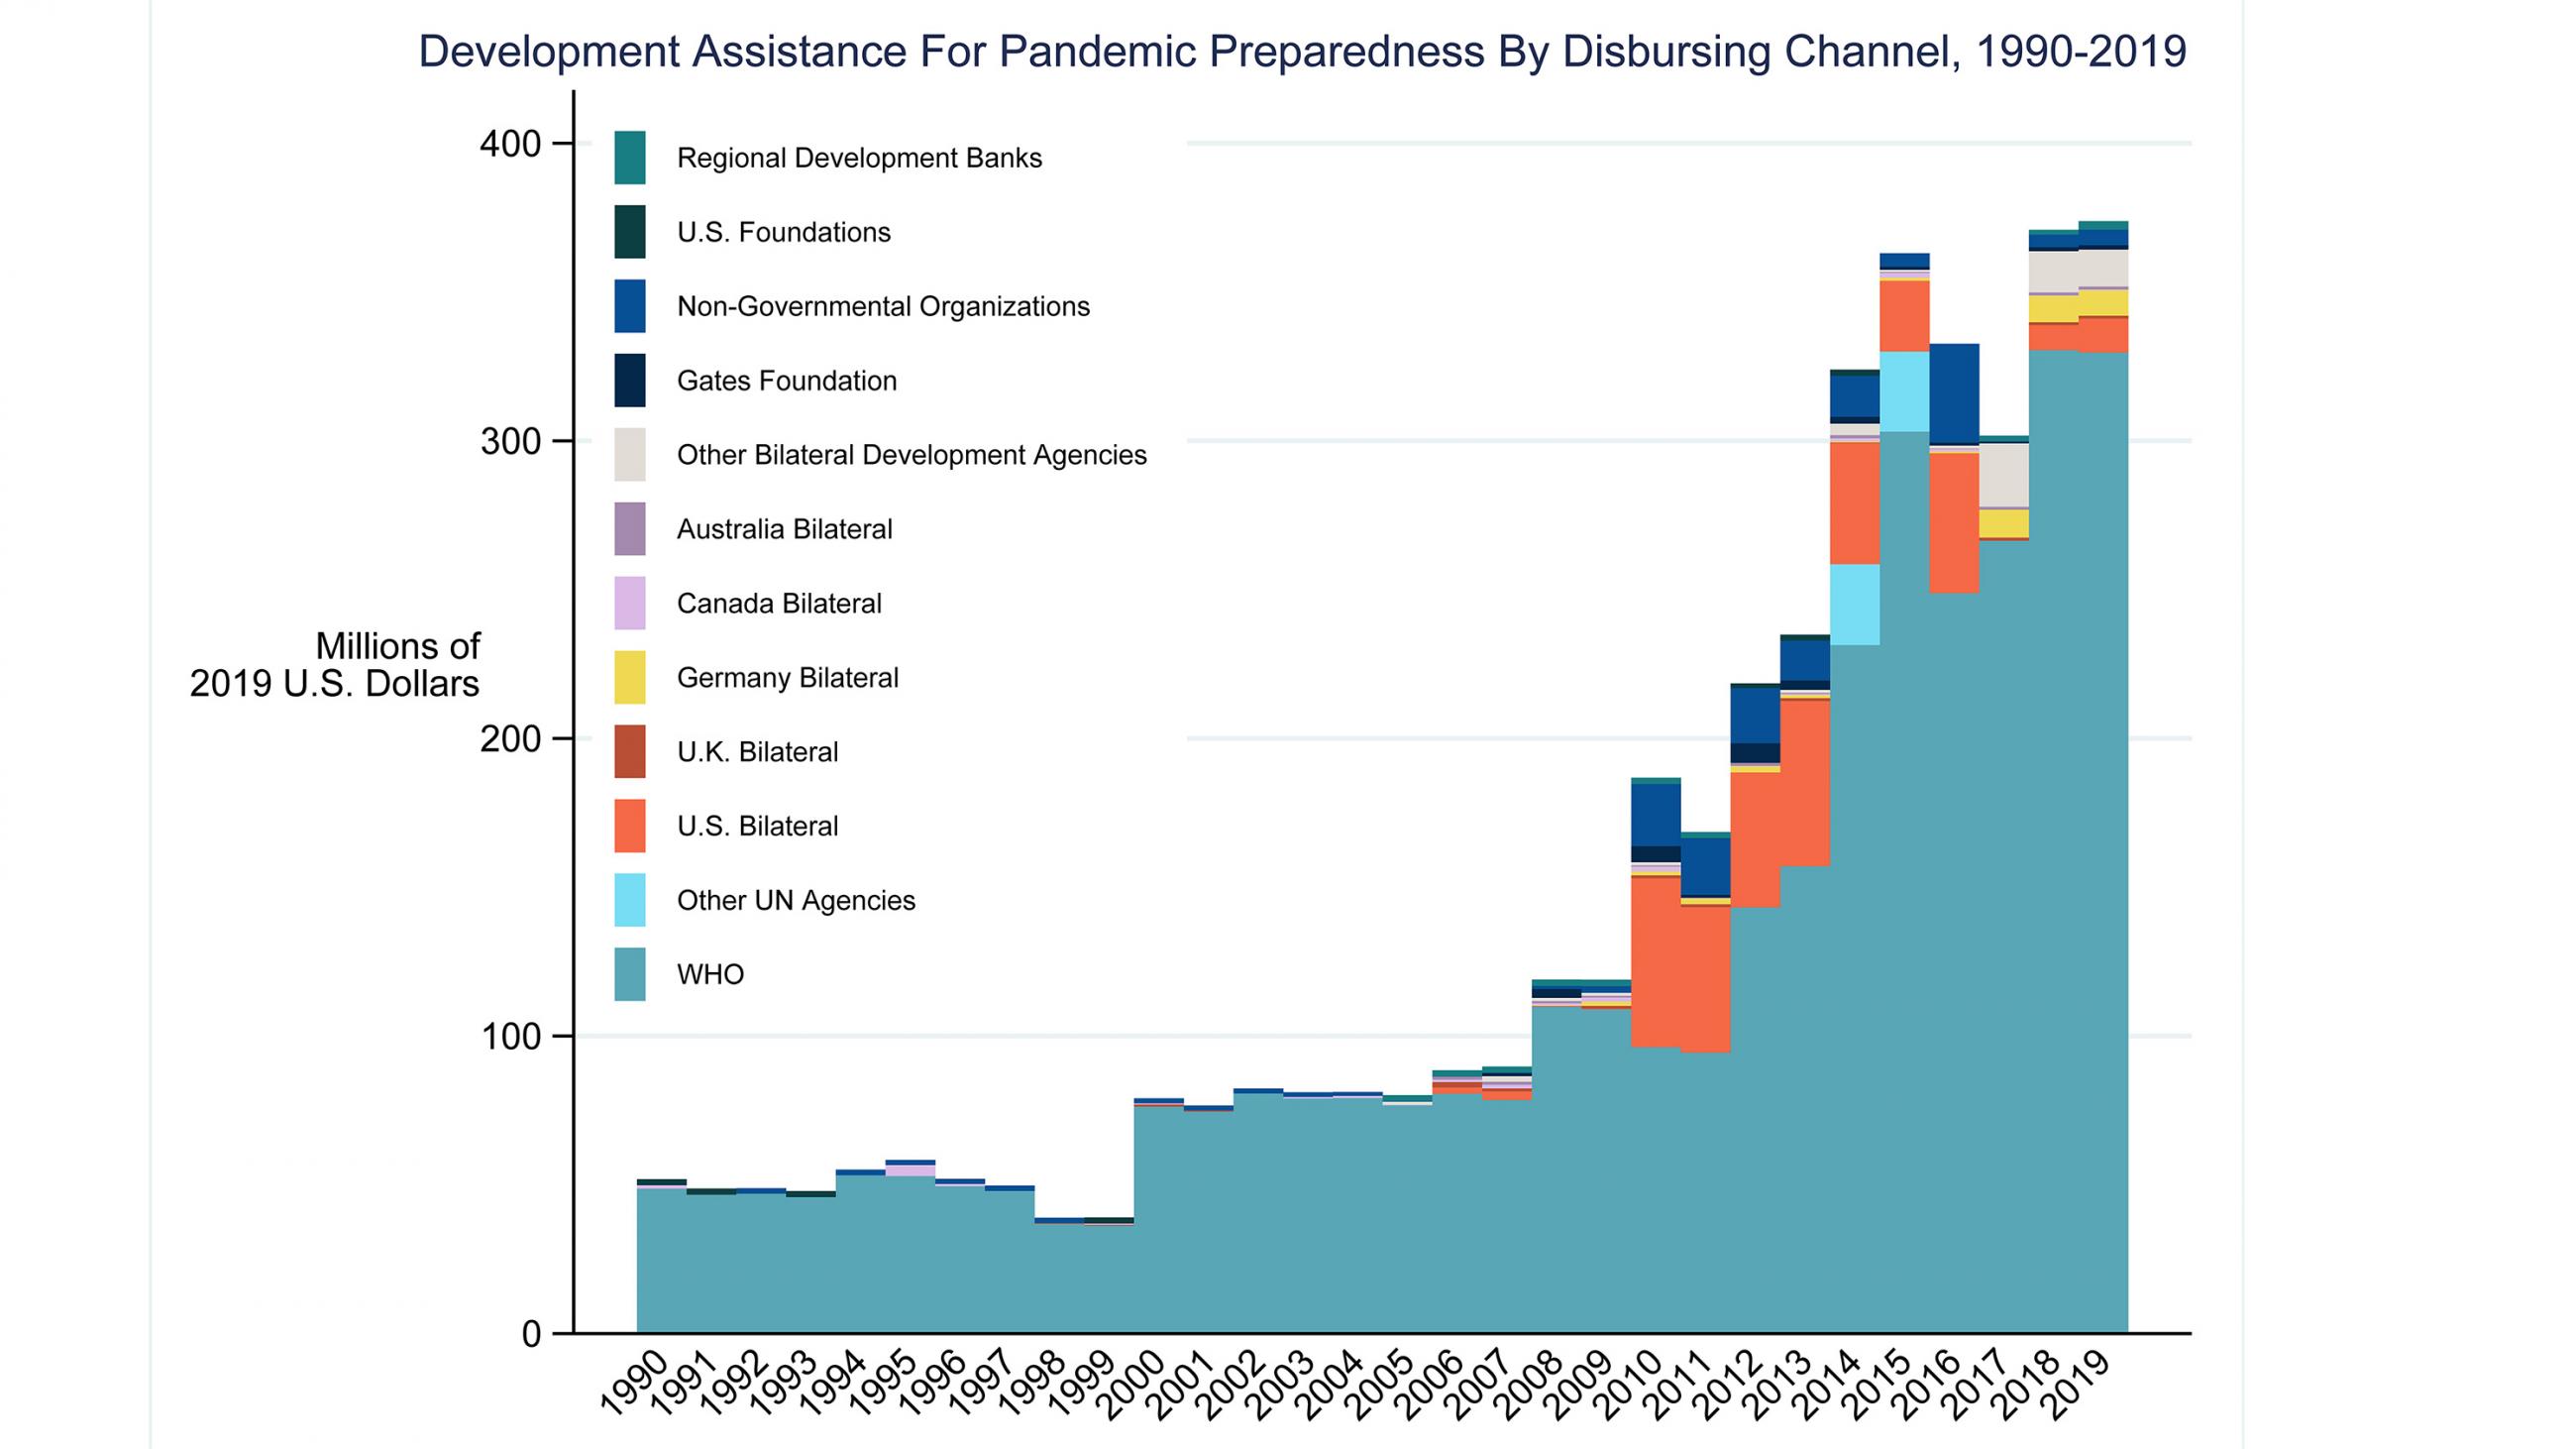 The bar chart shows sources of pandemic preparedness spending, organizations and countries.  